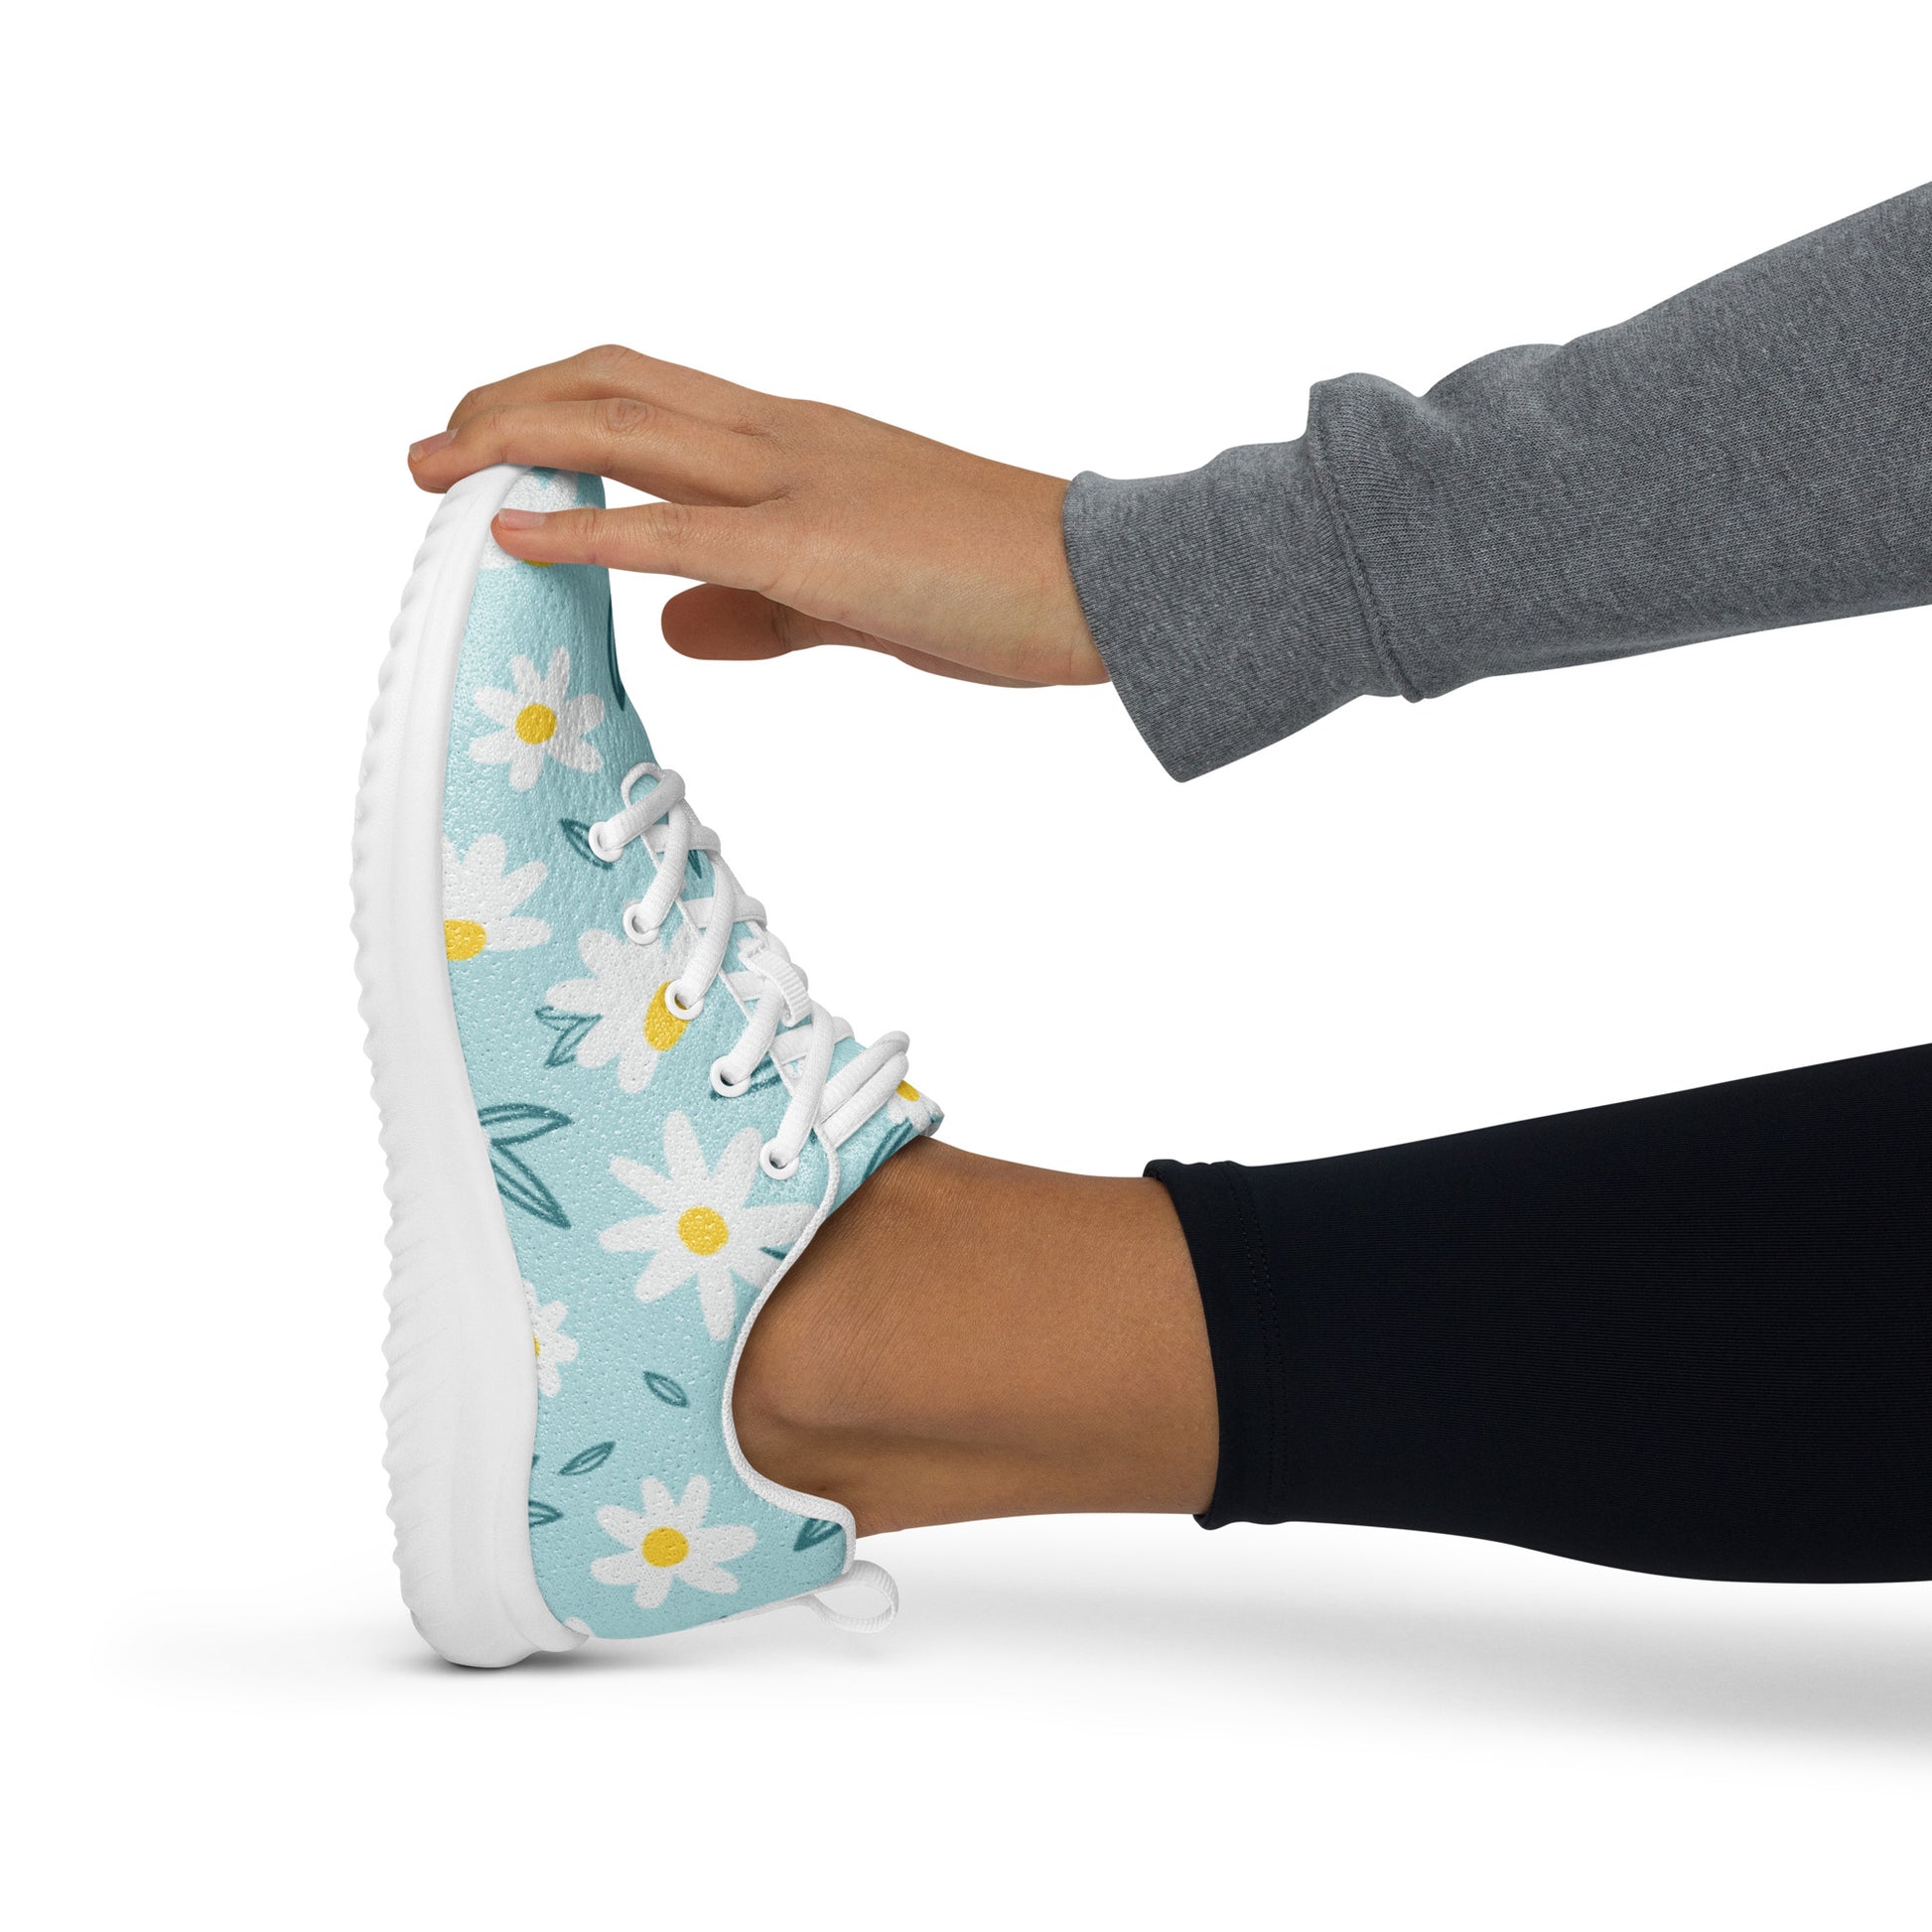 Floral Bloom Athletic Shoes for Women - FabFemina